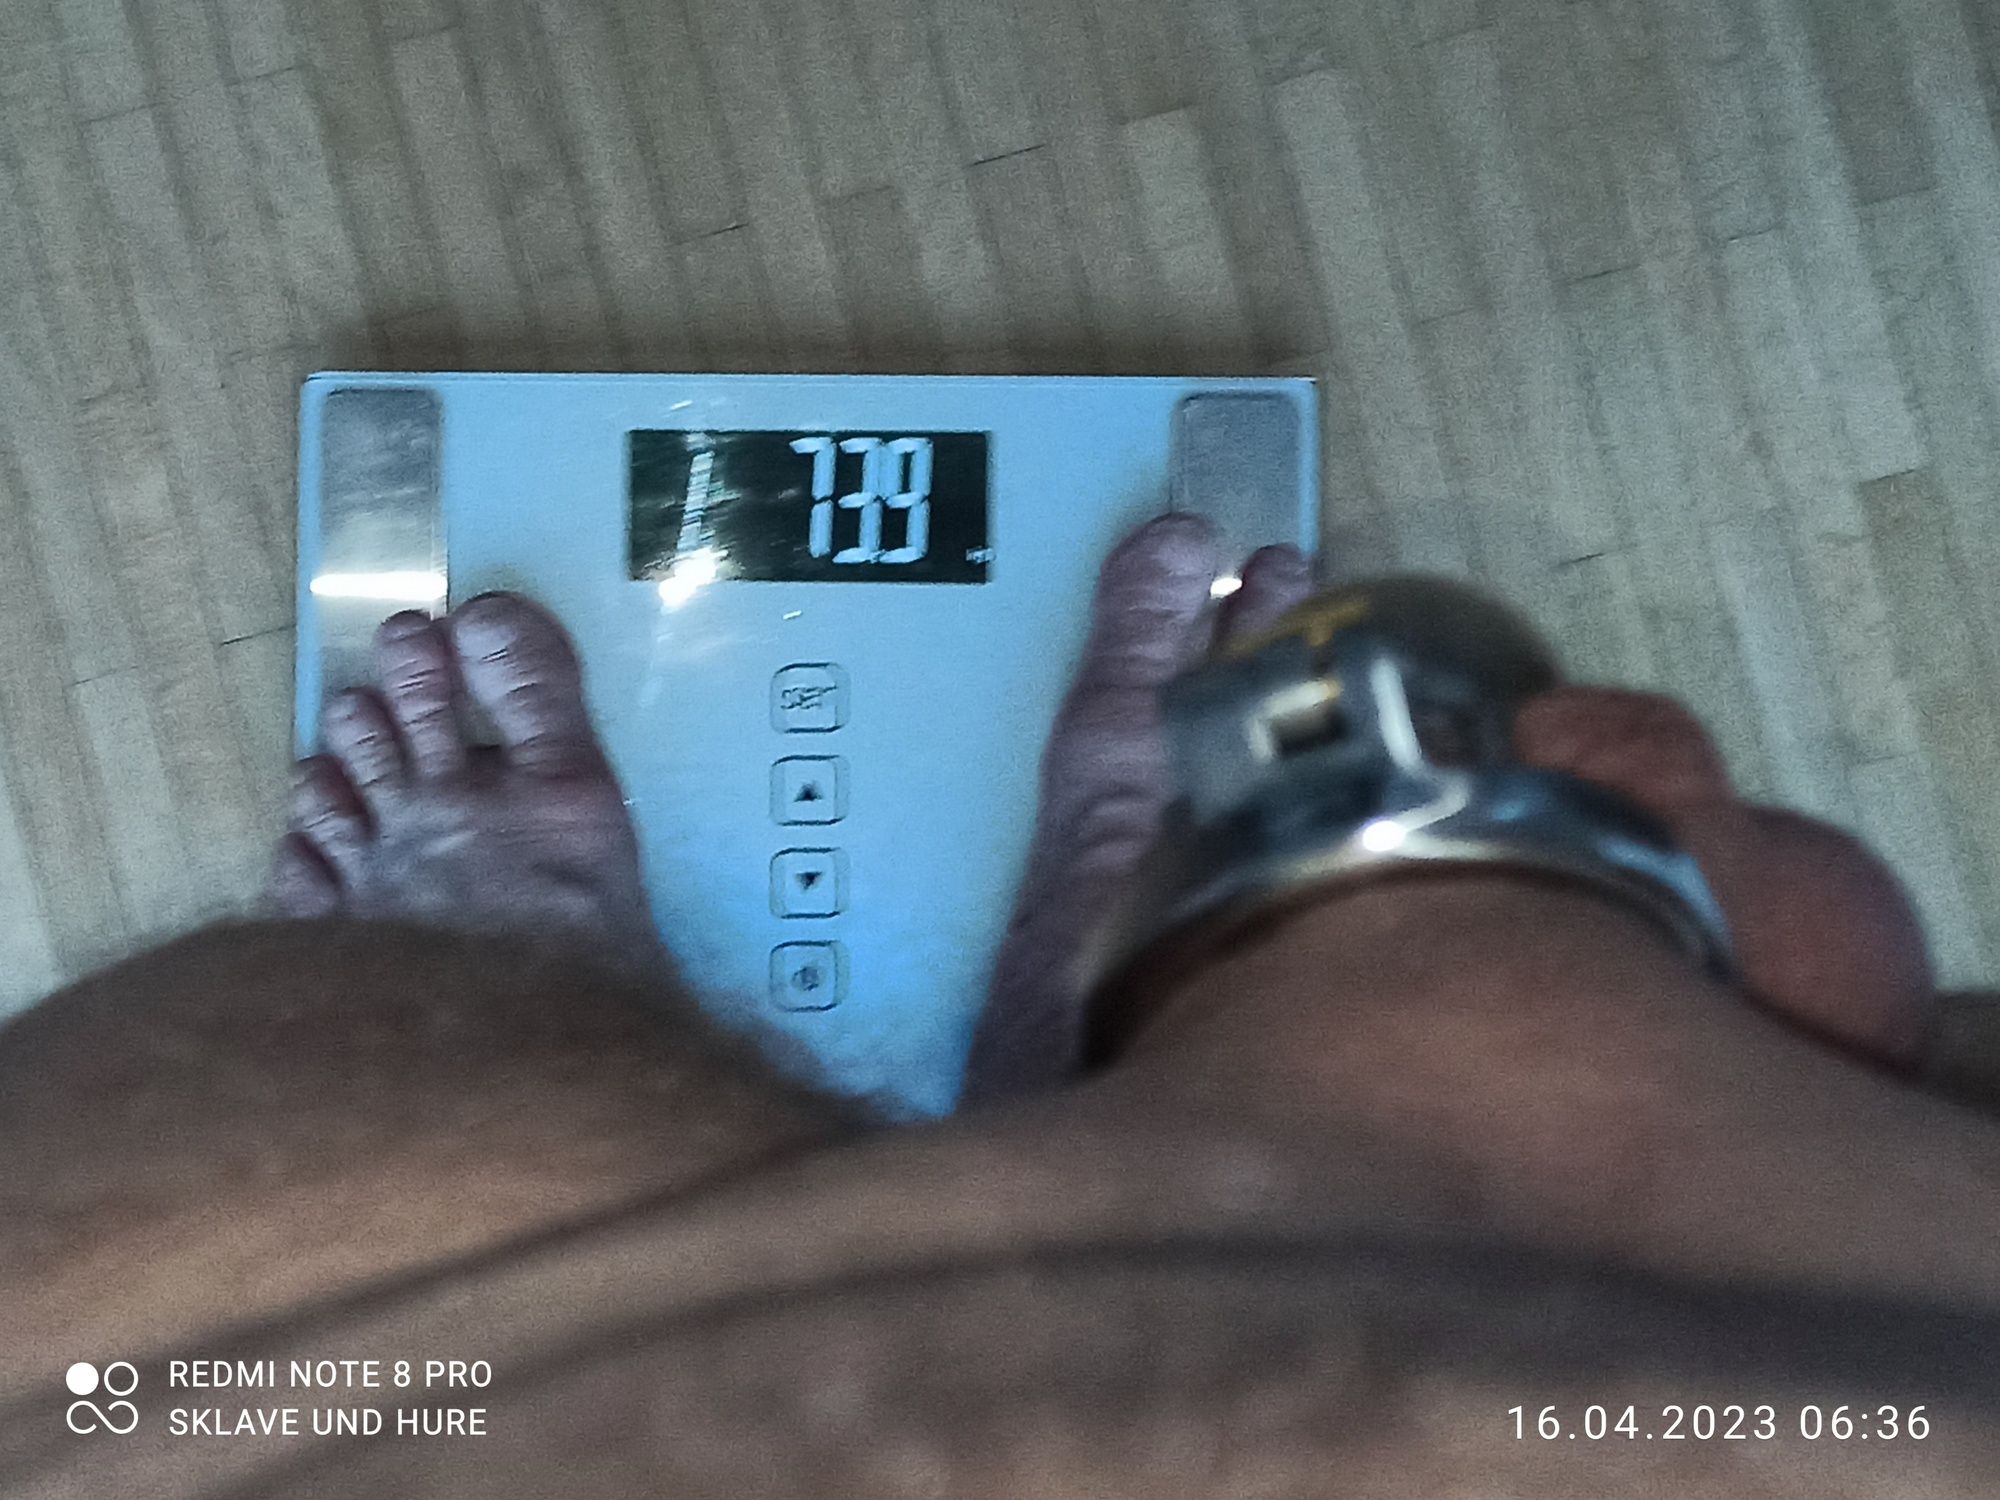 weighing cagecheck clamps 16.04.2023 #14